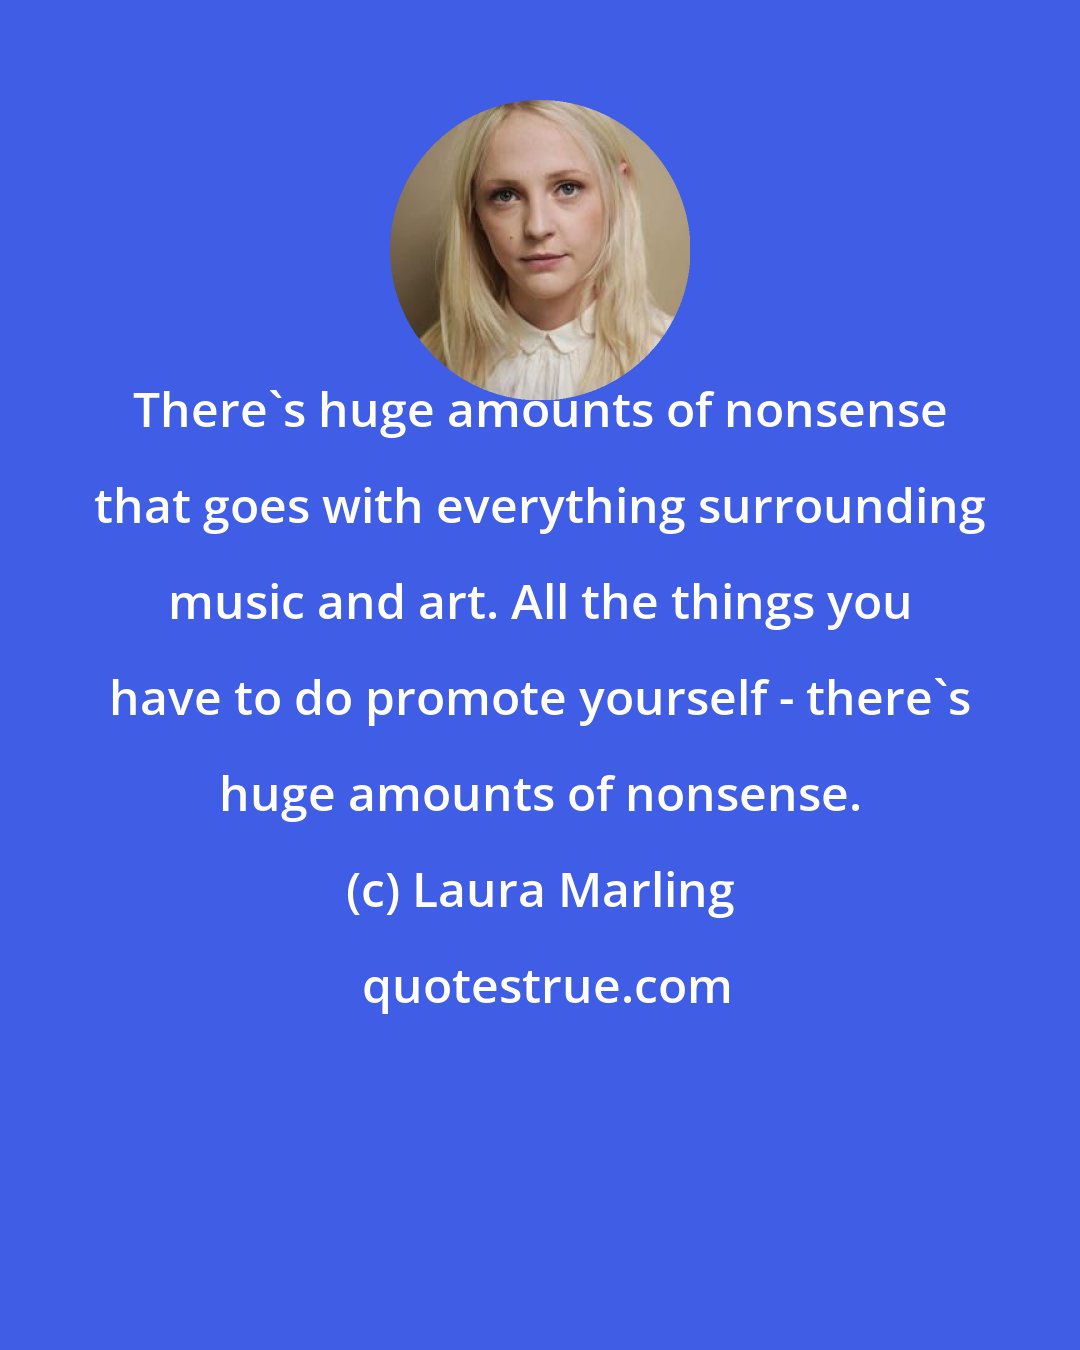 Laura Marling: There's huge amounts of nonsense that goes with everything surrounding music and art. All the things you have to do promote yourself - there's huge amounts of nonsense.